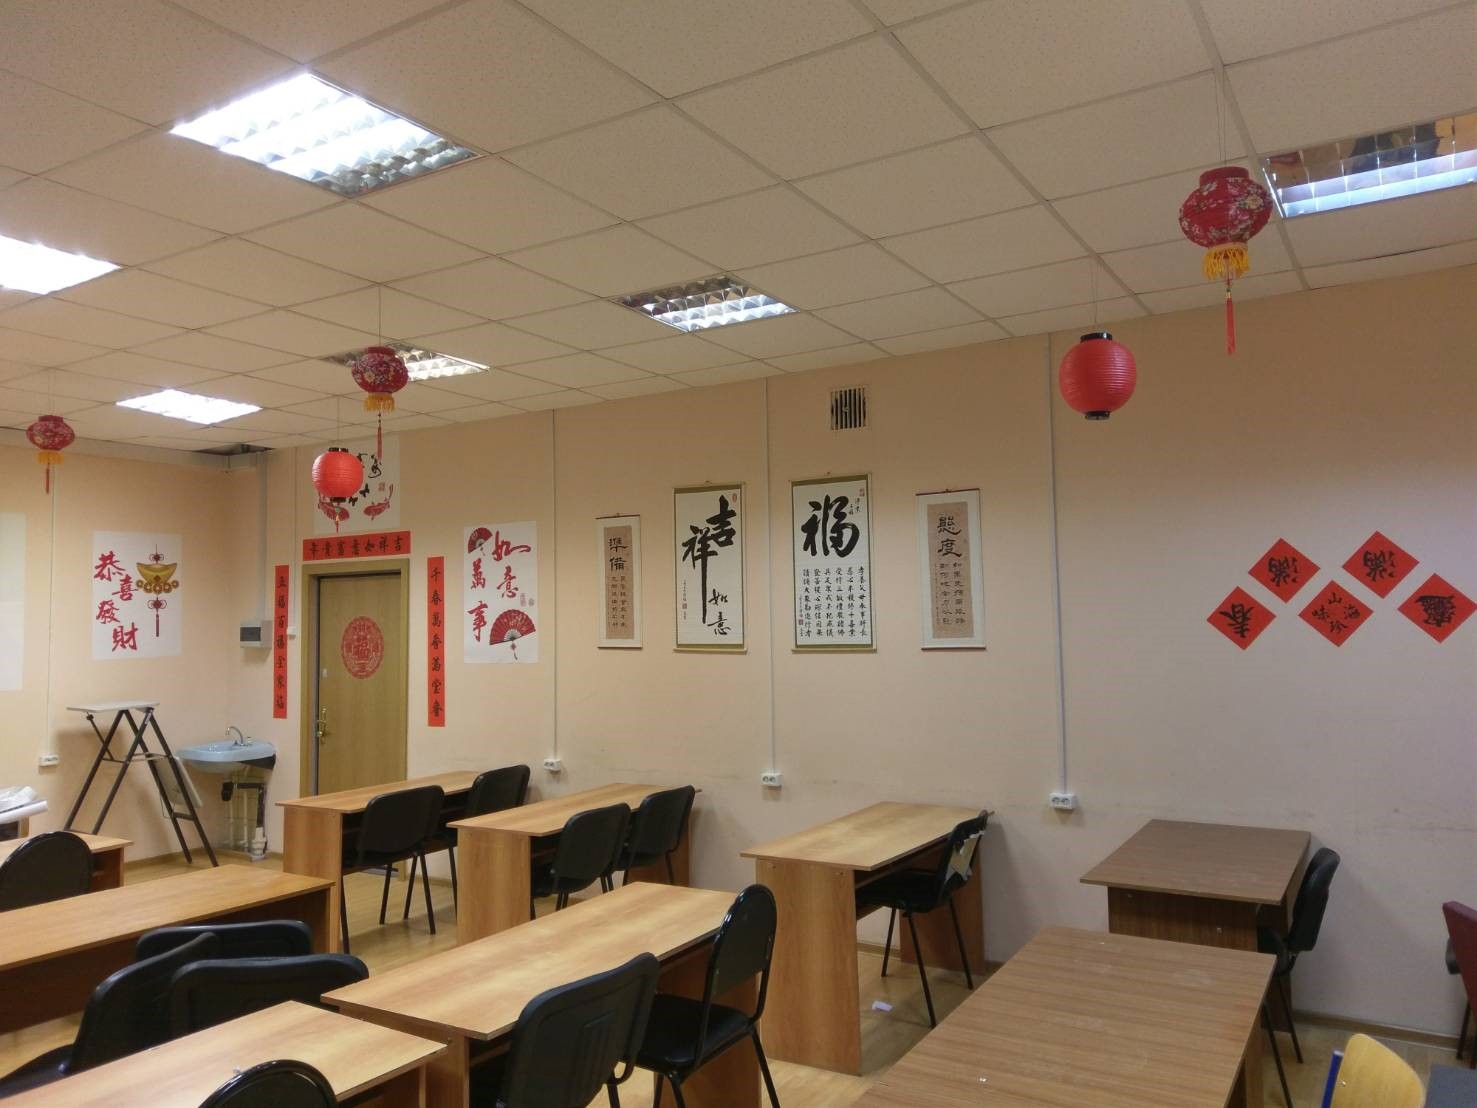 First Mandarin Chinese Auditorium Set Up at Moscow State Pedagogical University (MSPU) sponsored by the Republic of China (Taiwan)